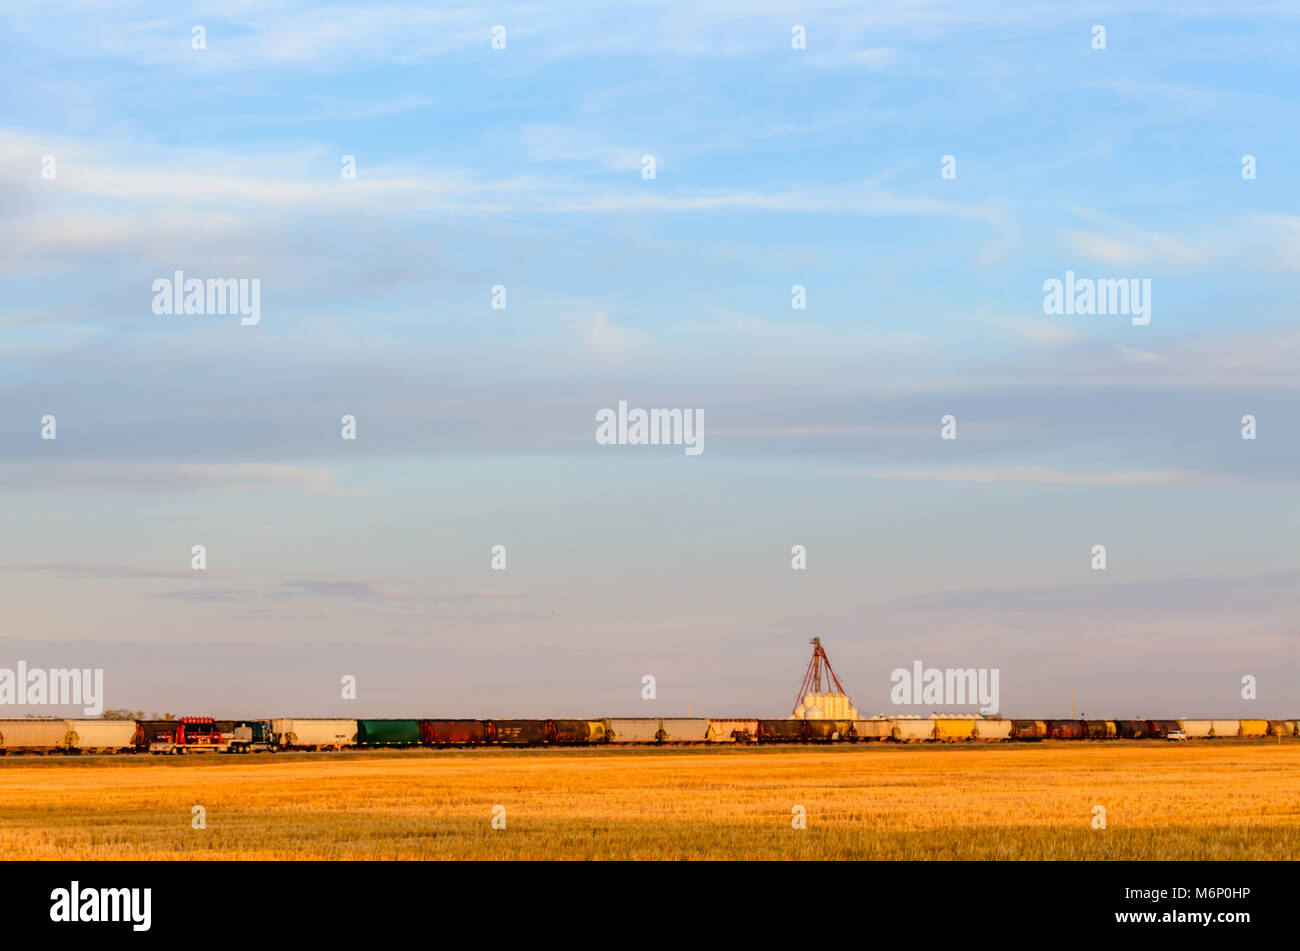 a yellow wheat field, railway cars, trucks traveling along the road, a grain terminal under a huge blue sky with purple clouds on a hot August evening Stock Photo